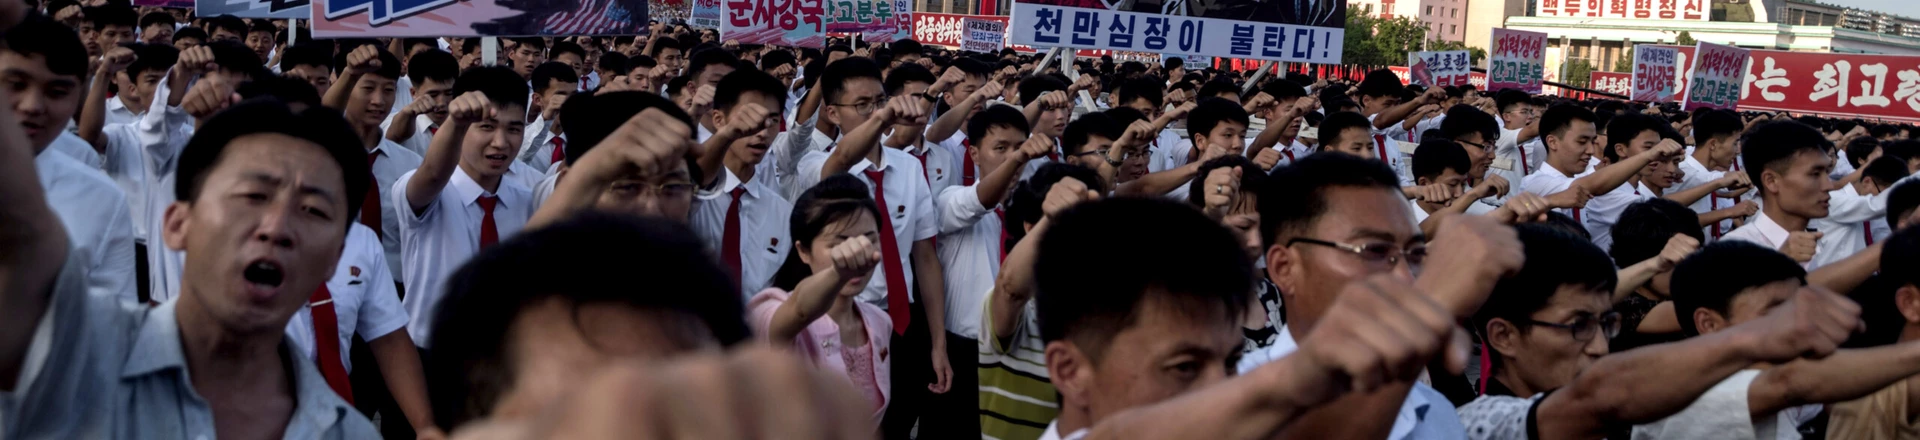 People wave banners and shout slogans as they attend a rally in support of North Korea's stance against the US, on Kim Il-Sung square in Pyongyang on August 9, 2017. 
US President Donald Trump said the United States' nuclear arsenal was "more powerful than ever" in a fresh warning to North Korea over its repeated missile tests. / AFP PHOTO / KIM Won-Jin        (Photo credit should read KIM WON-JIN/AFP/Getty Images)